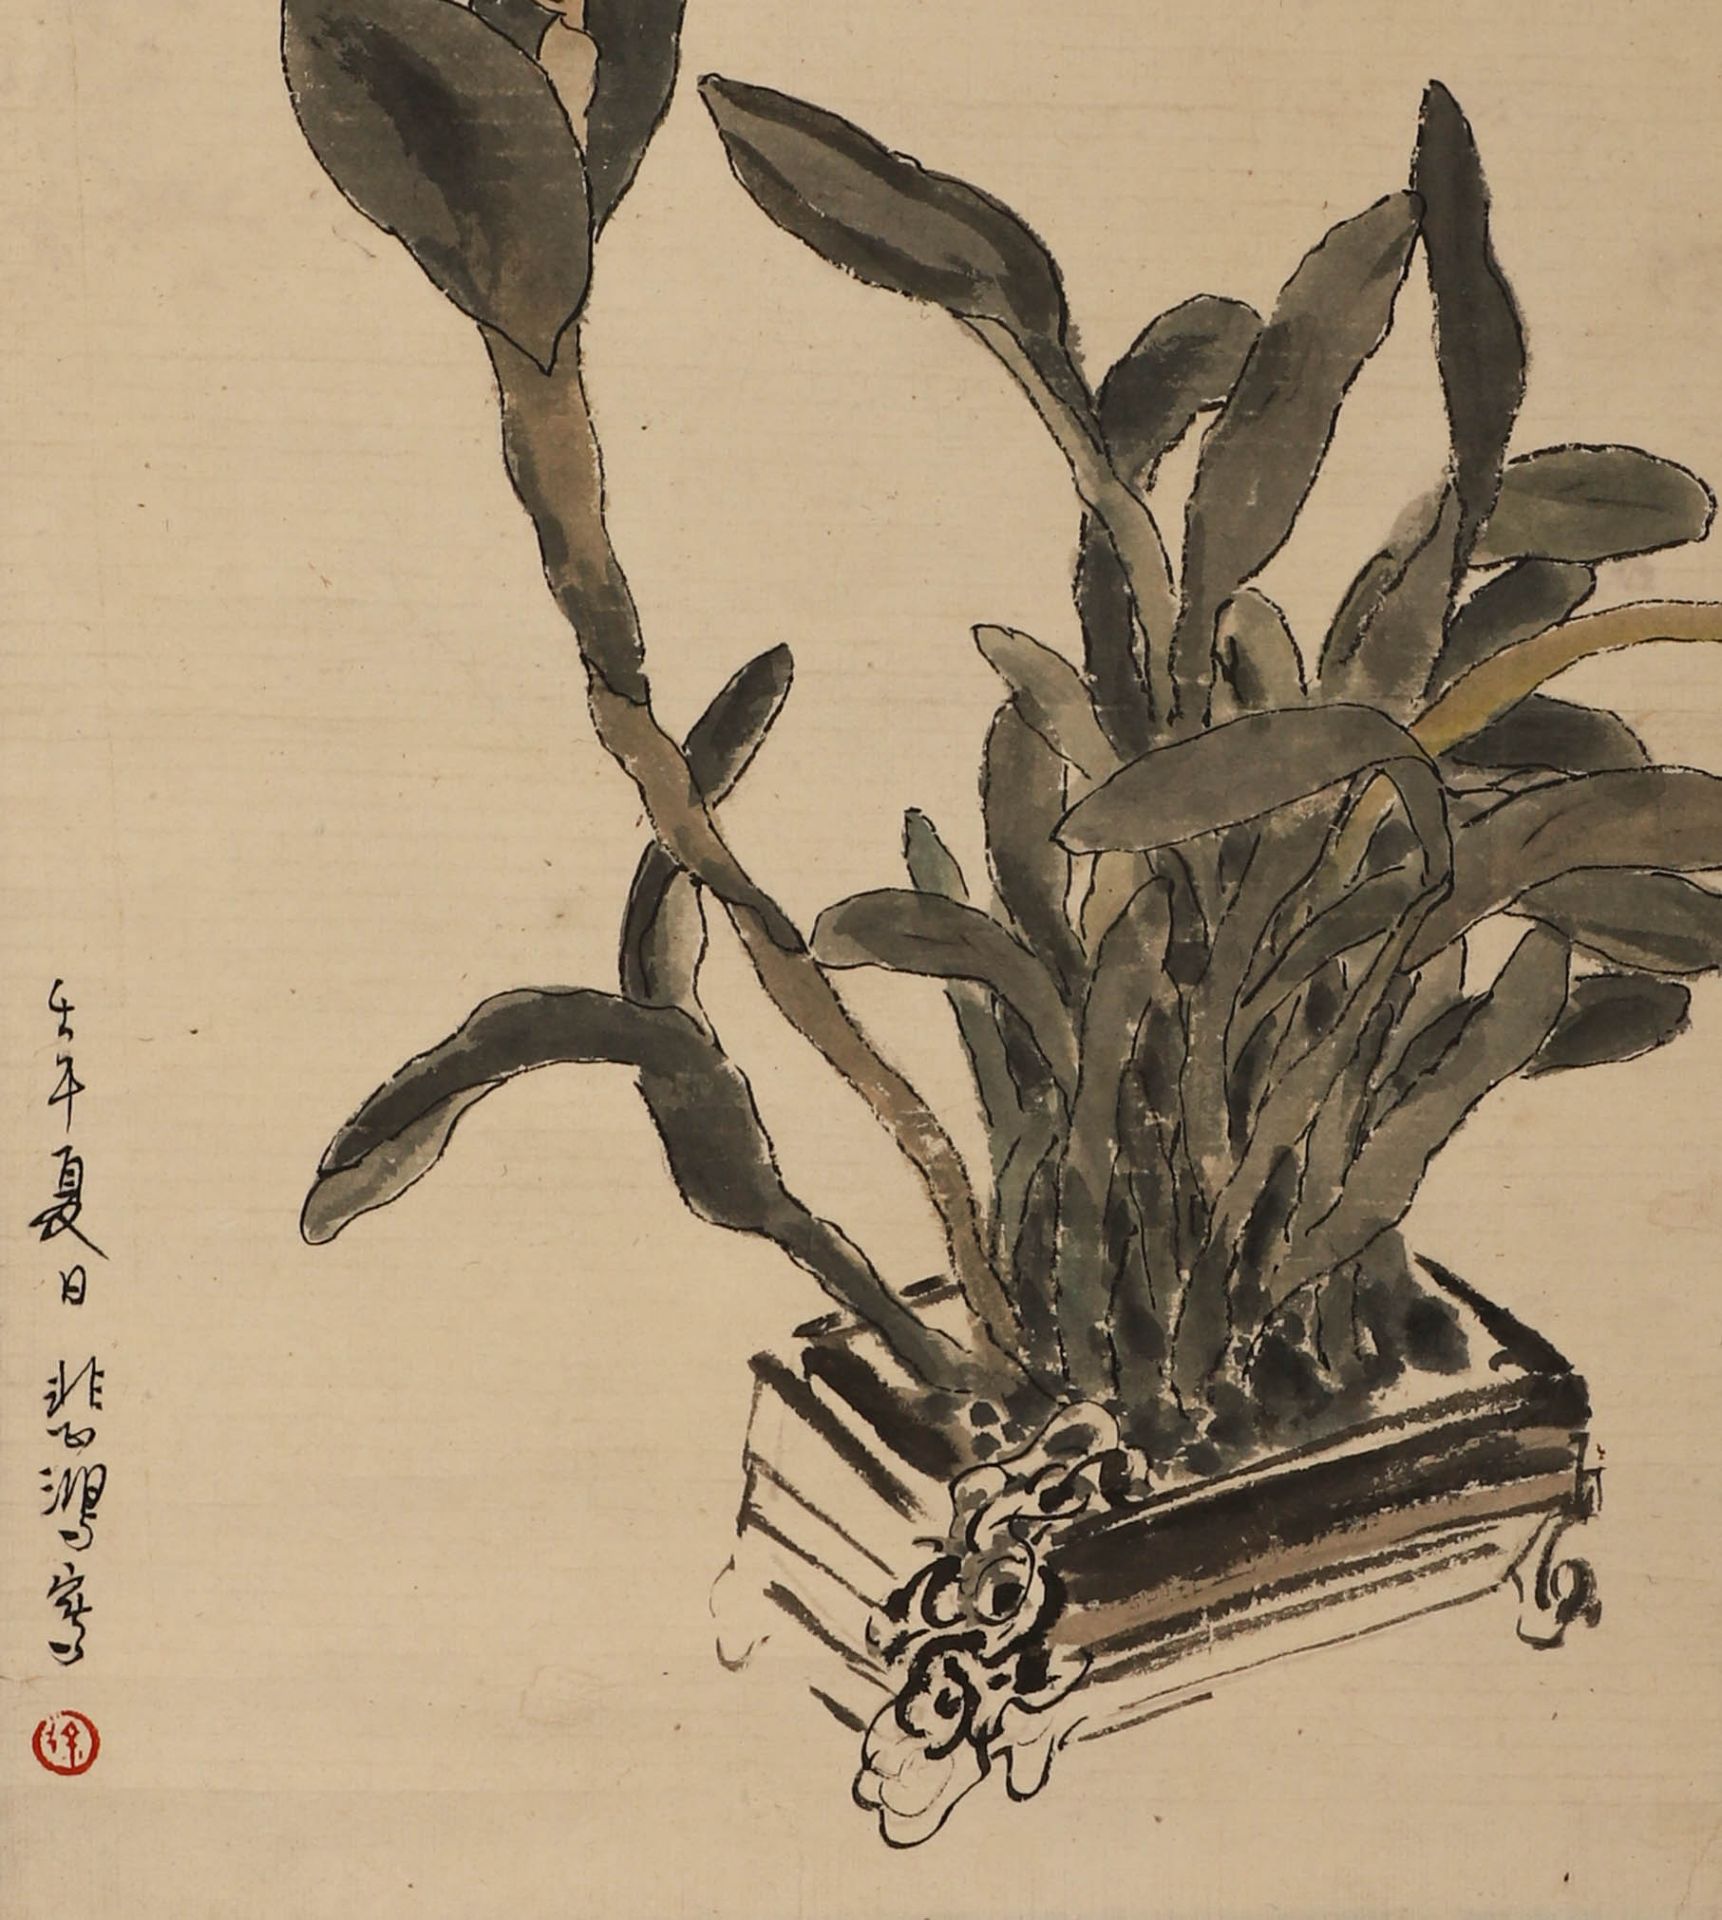 Flowers painting on paper by Xu Beihong  - Image 11 of 22